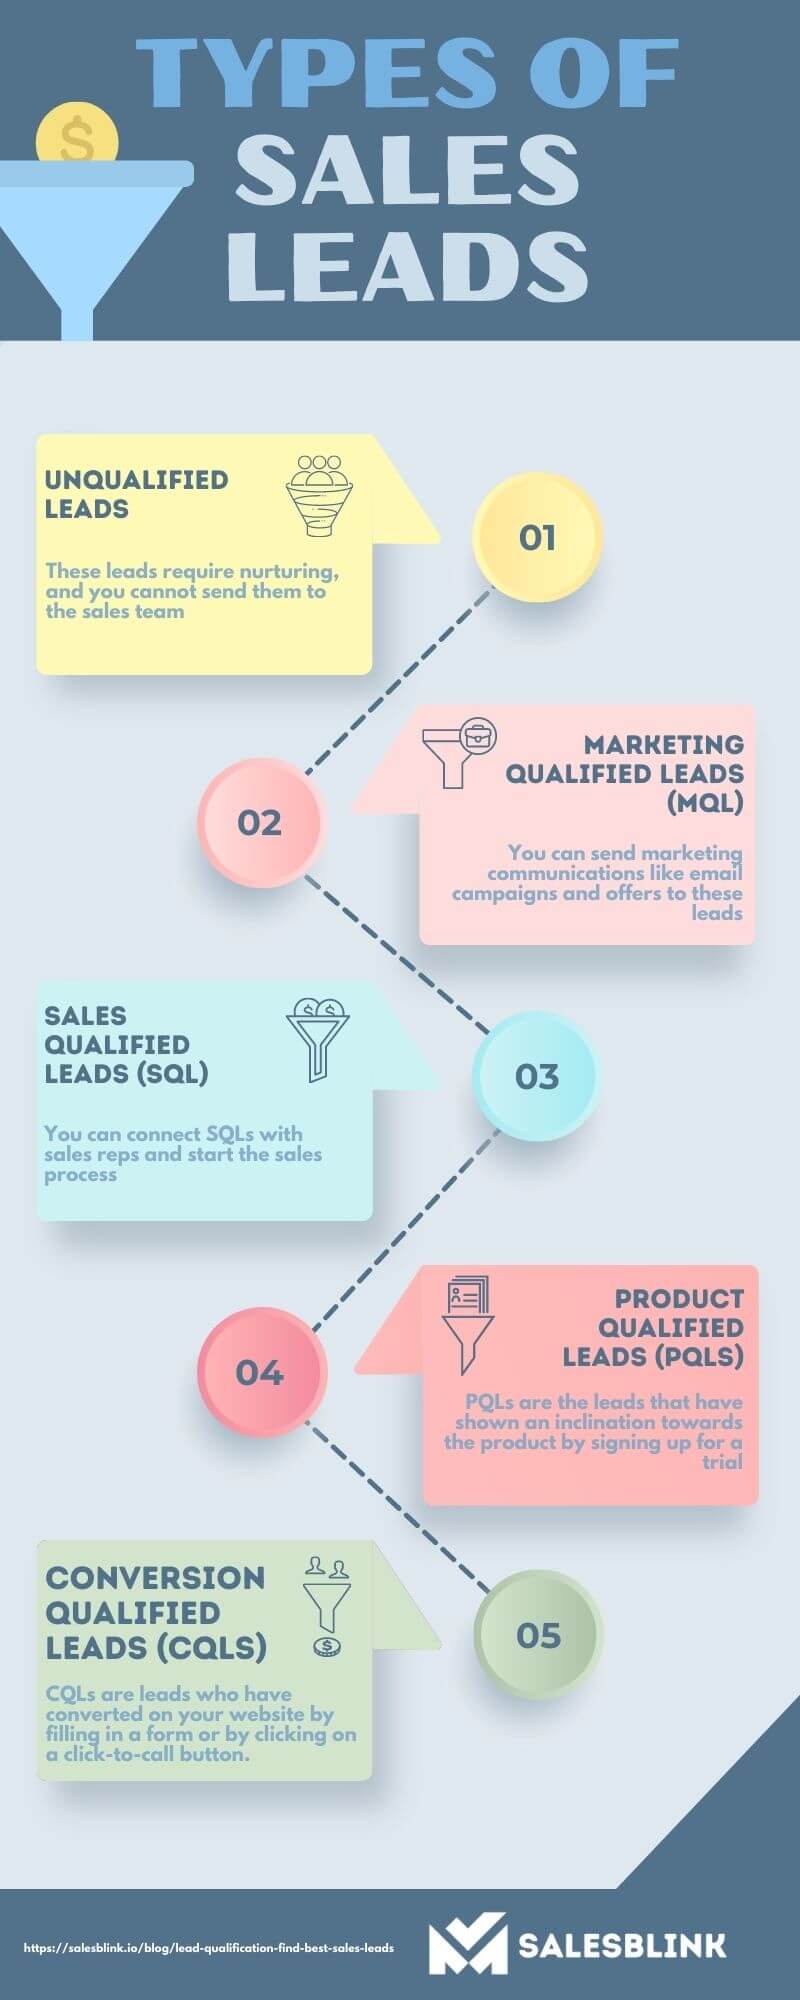 Types of Sales Leads - Lead Qualification